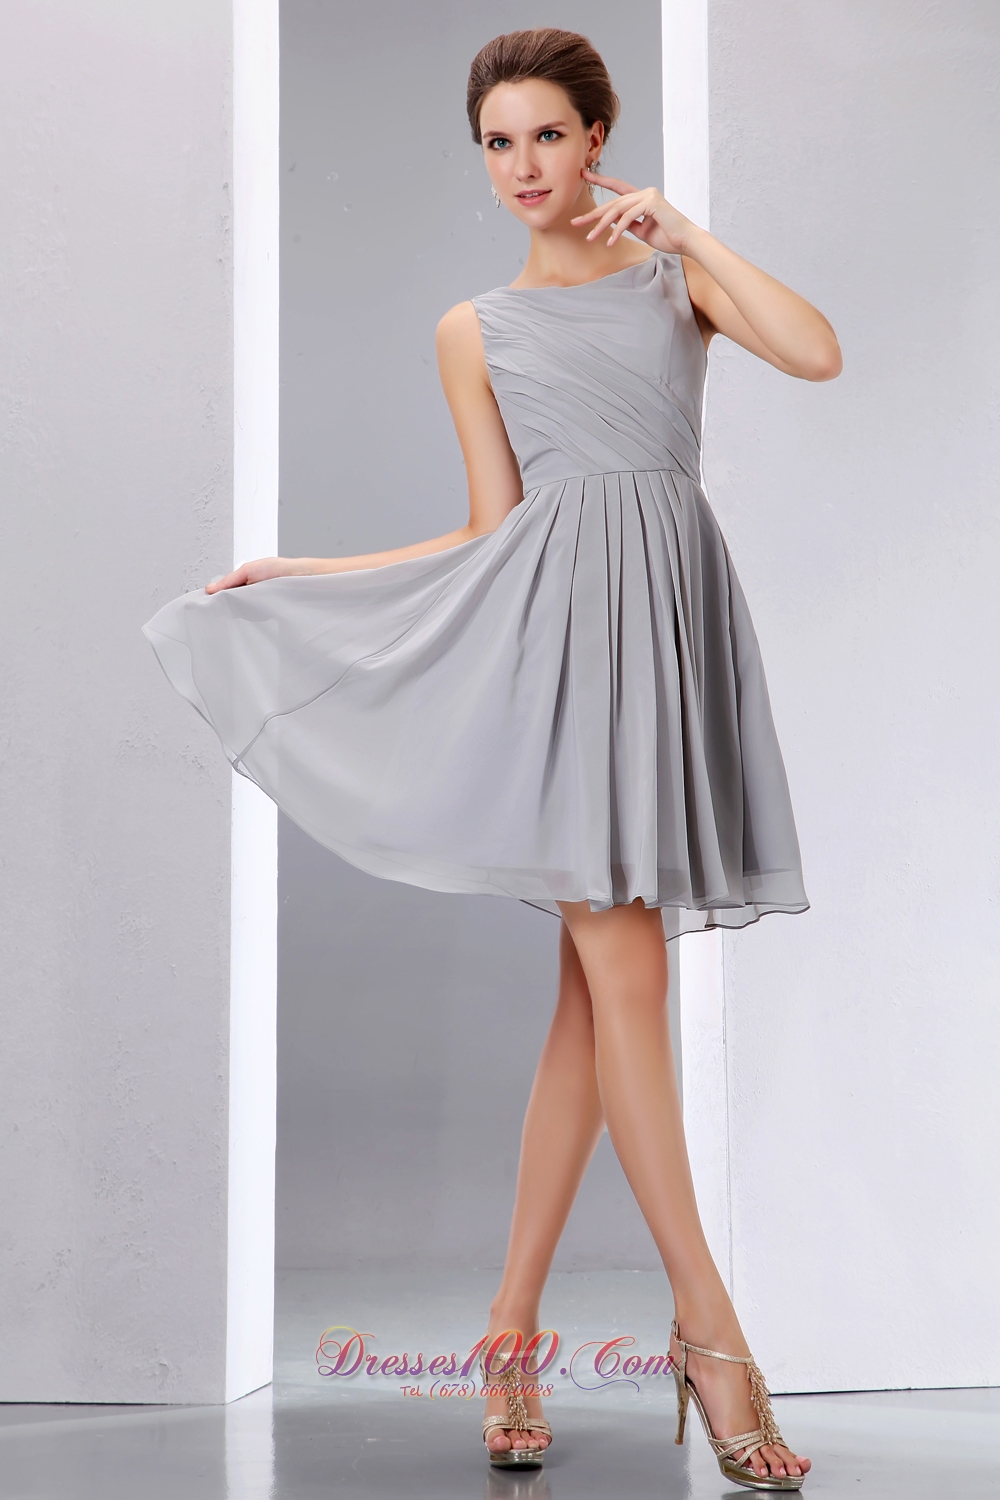 Short Prom Dresses, Scoop Grey Chiffon Short Ruched Cocktail Dama ...